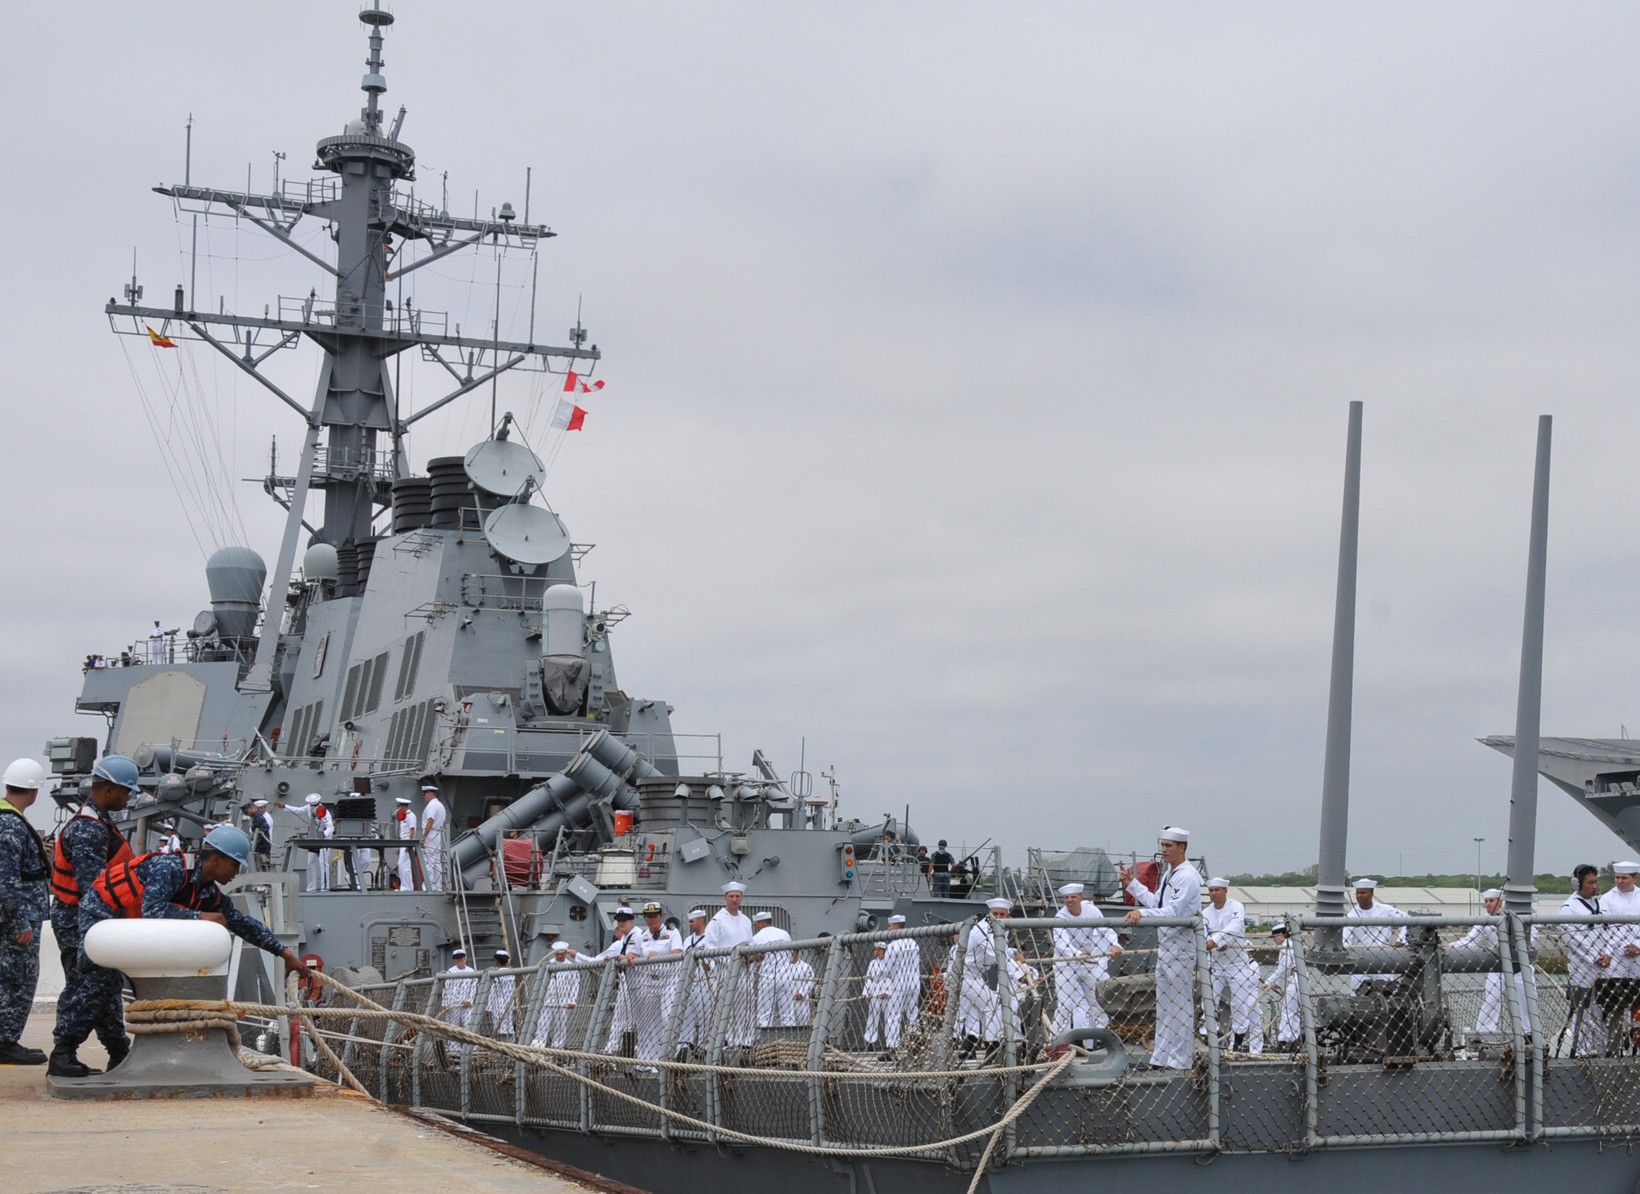 ddg-71 uss ross guided missile destroyer arleigh burke class aegis bmd 68